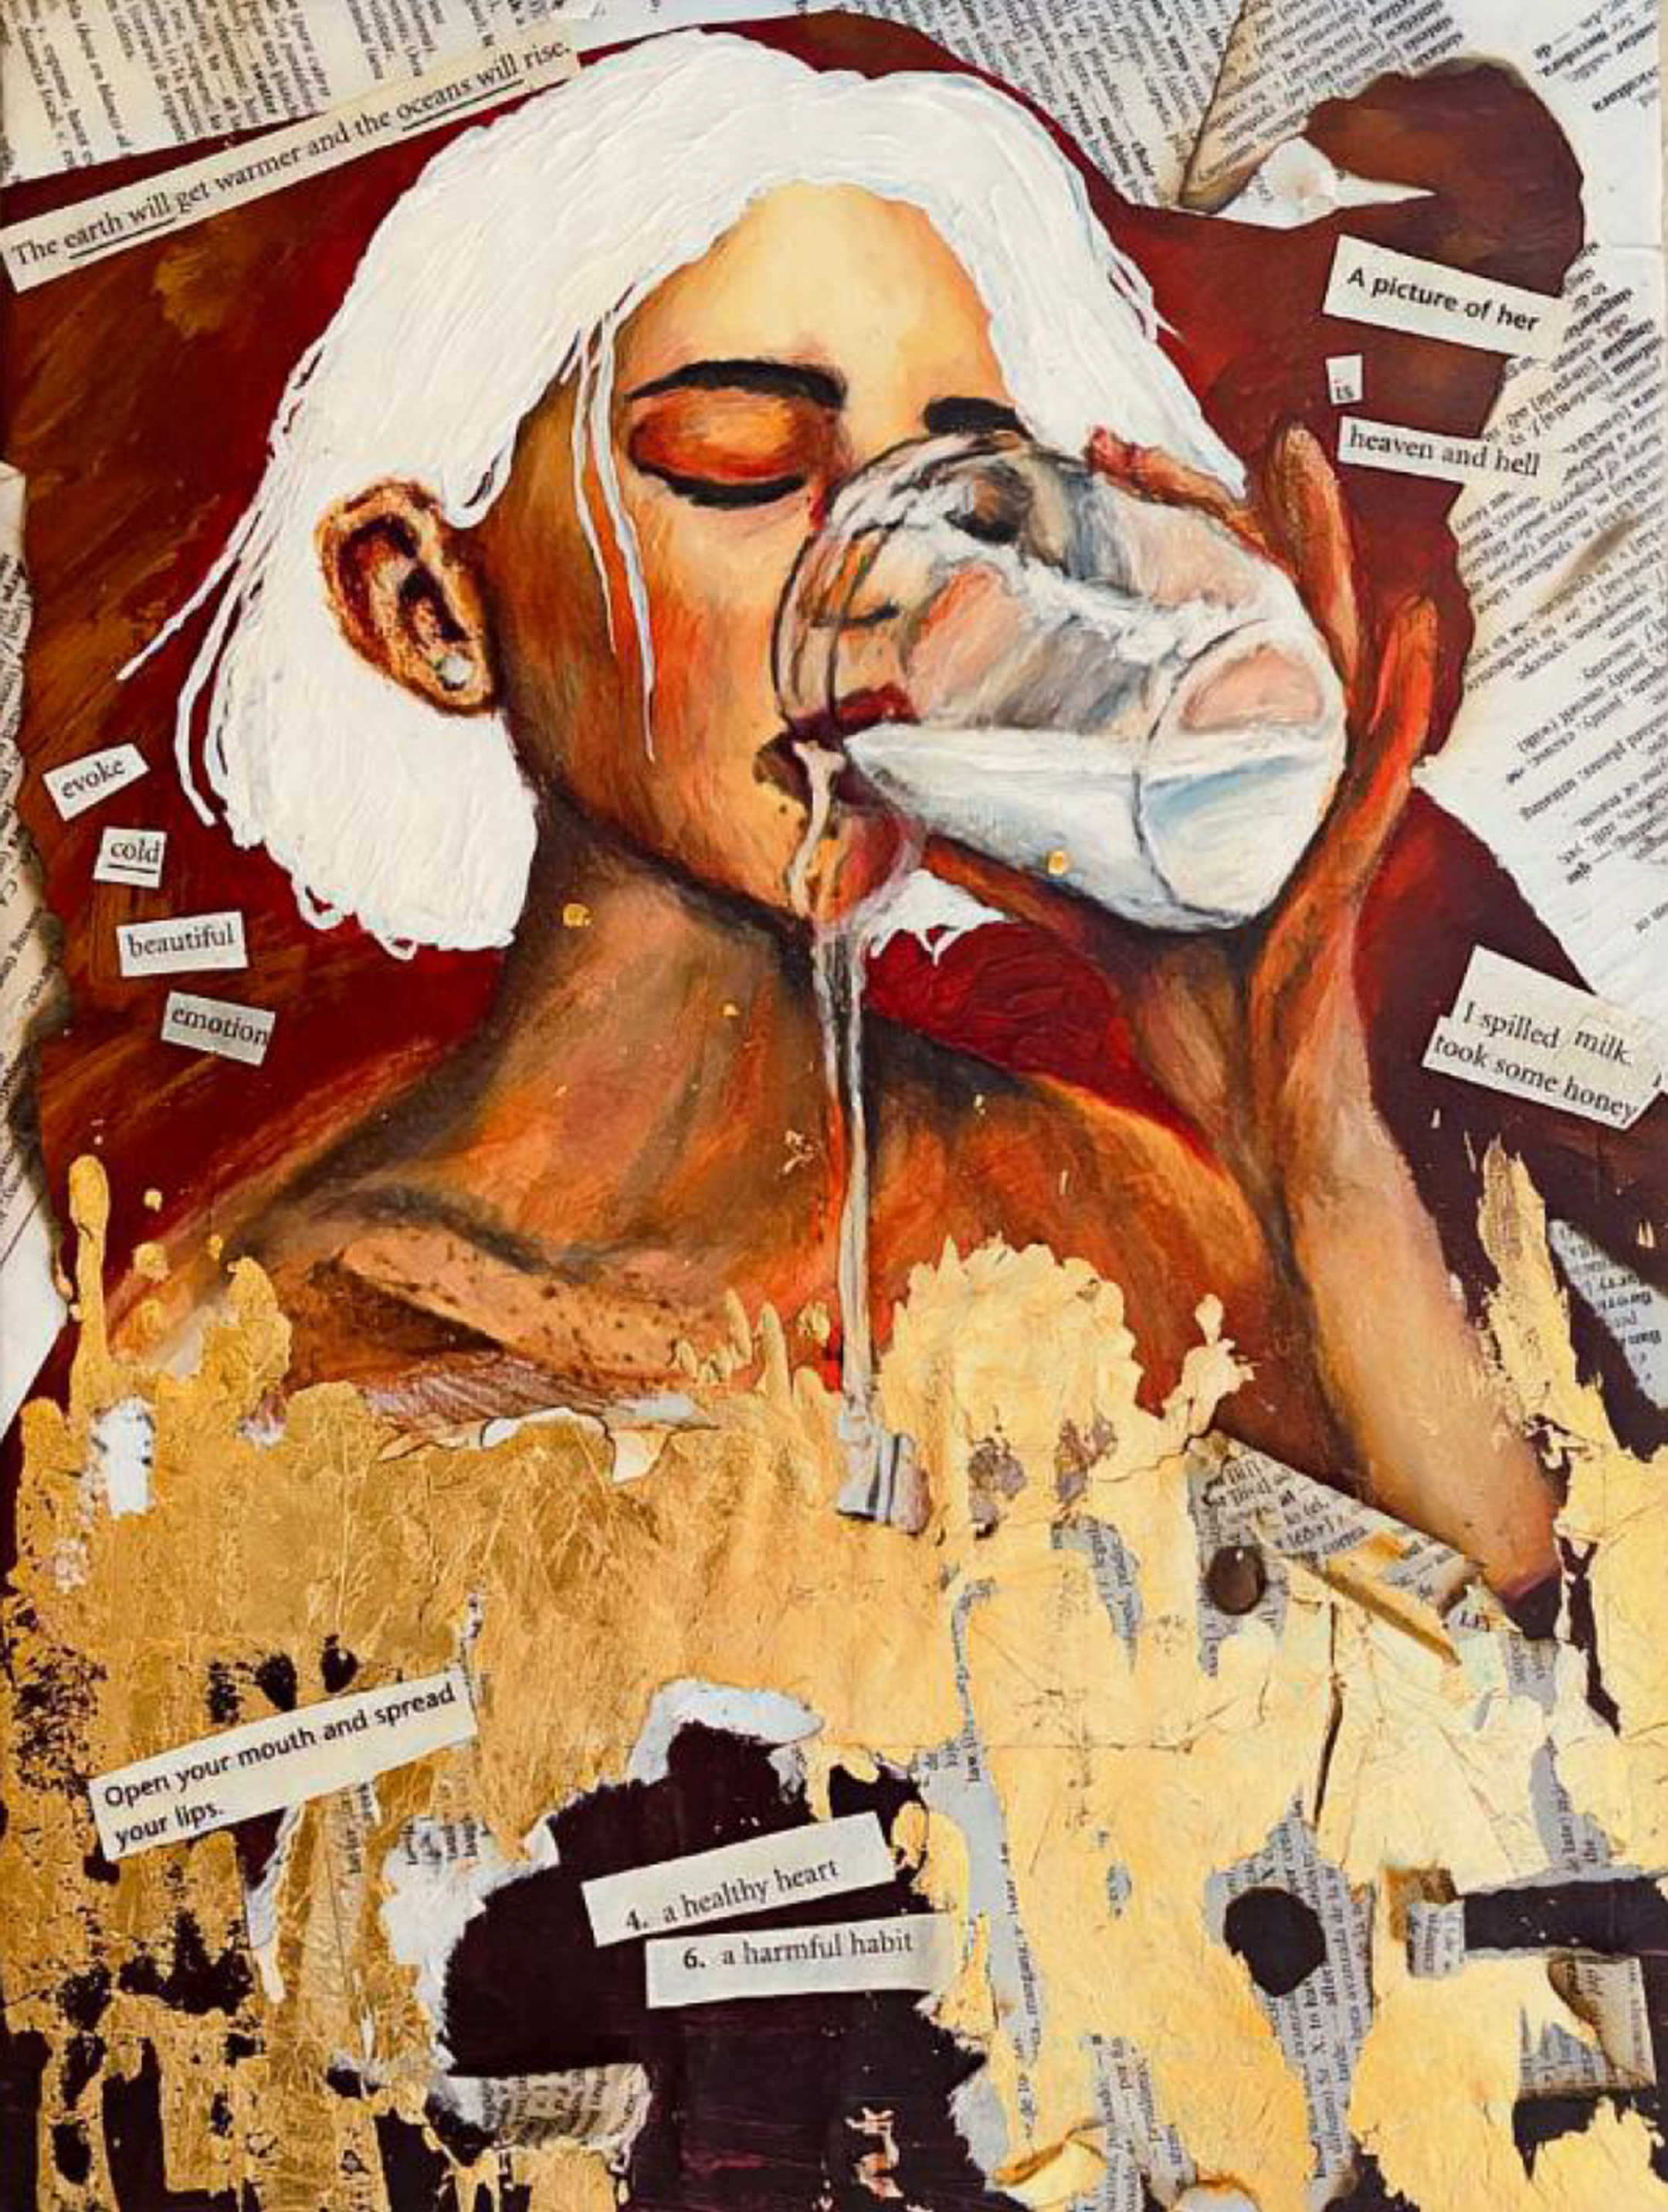 Collage of a young woman drinking milk